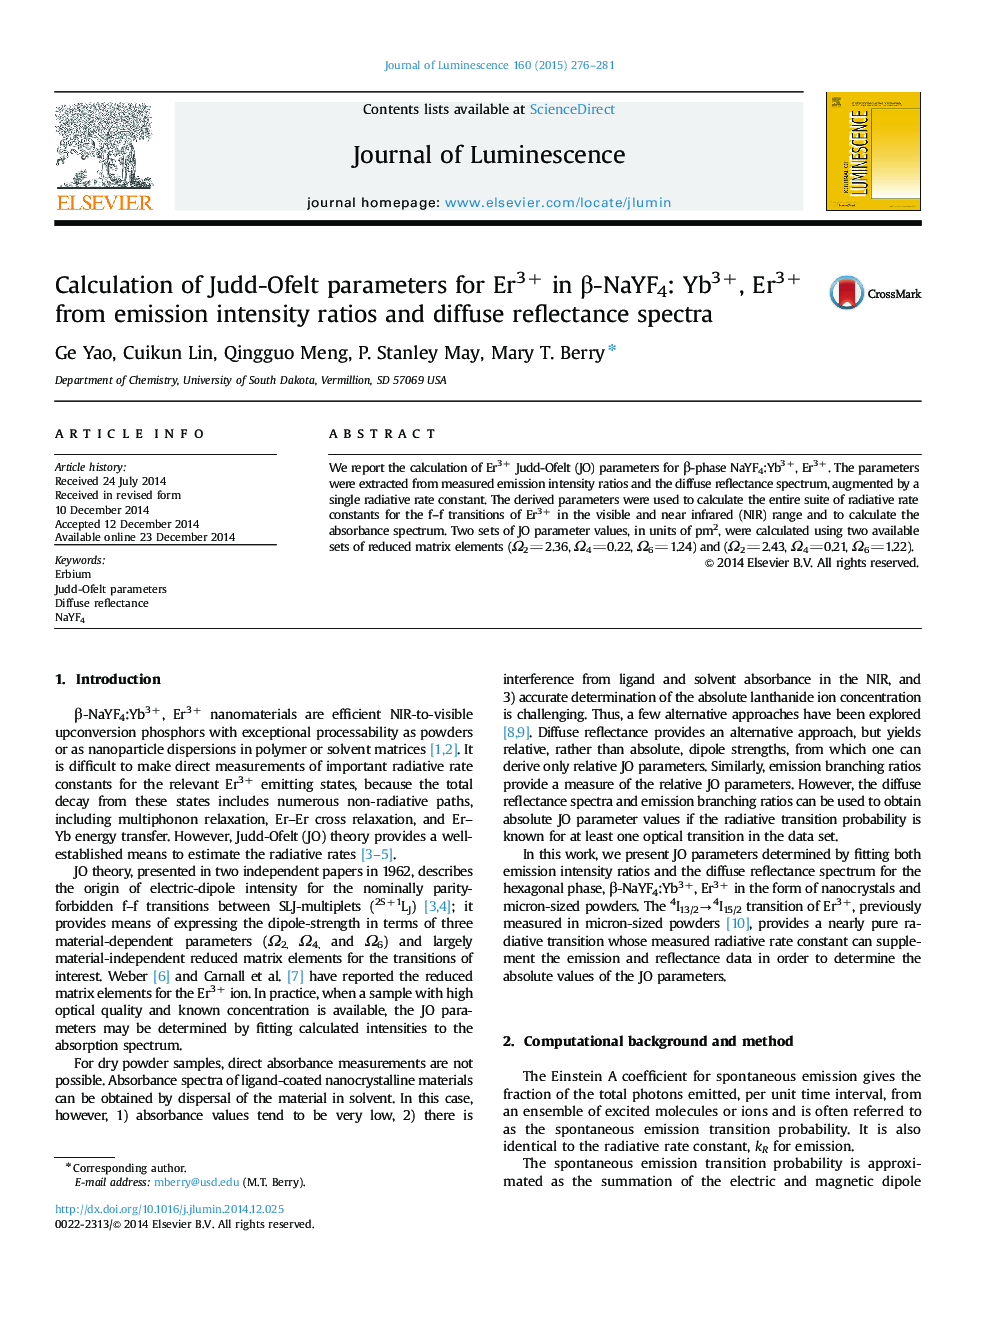 Calculation of Judd-Ofelt parameters for Er3+ in Î²-NaYF4: Yb3+, Er3+ from emission intensity ratios and diffuse reflectance spectra